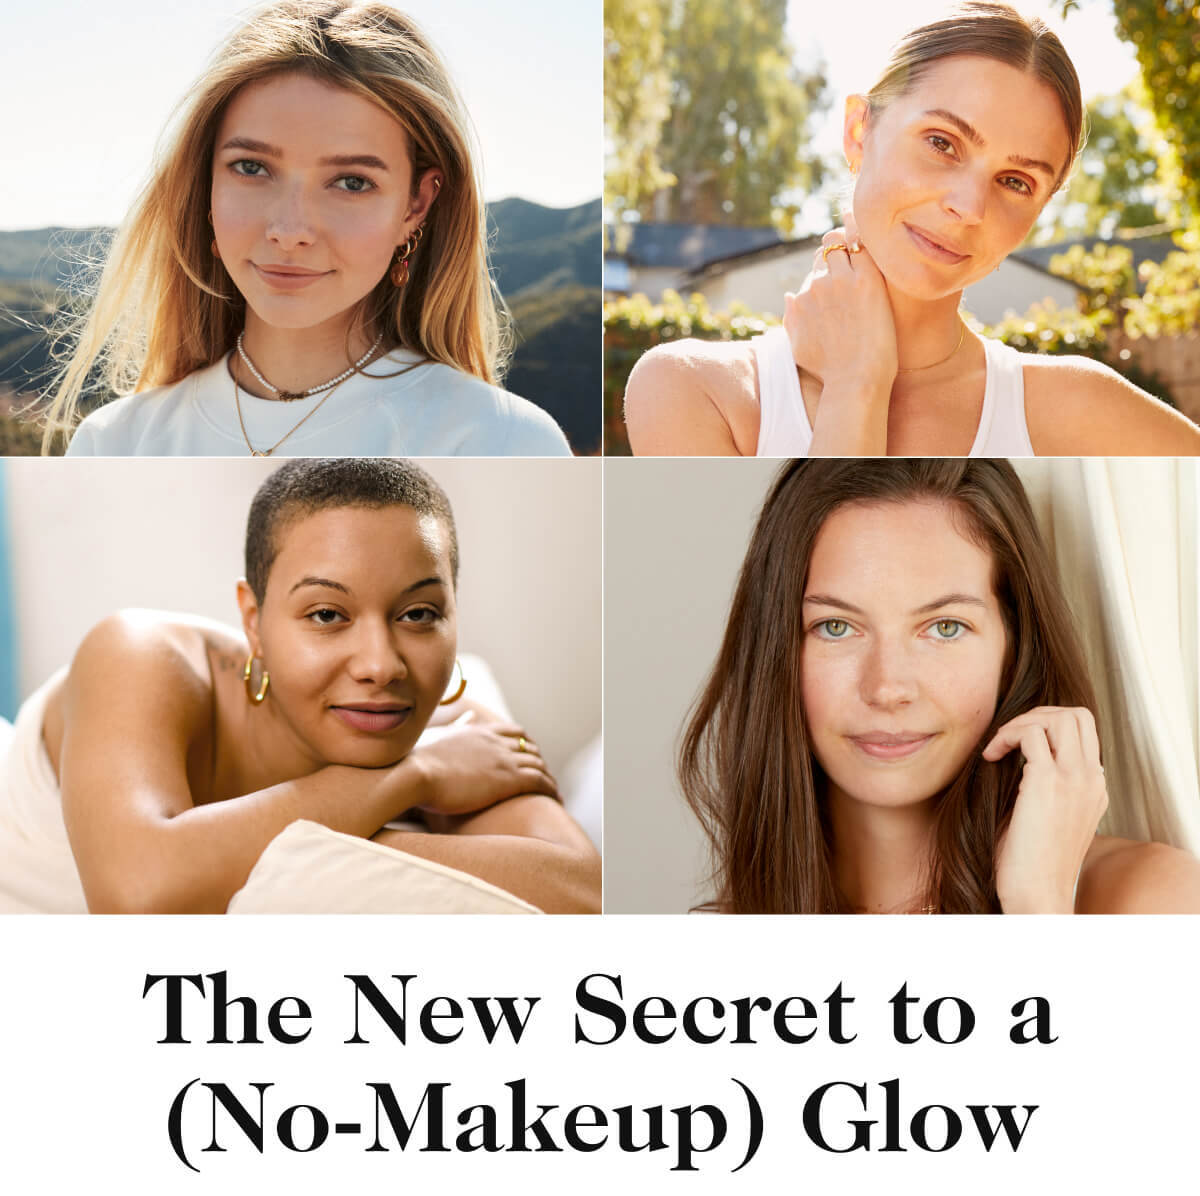 introducing GOOPGLOW Glow Lotion